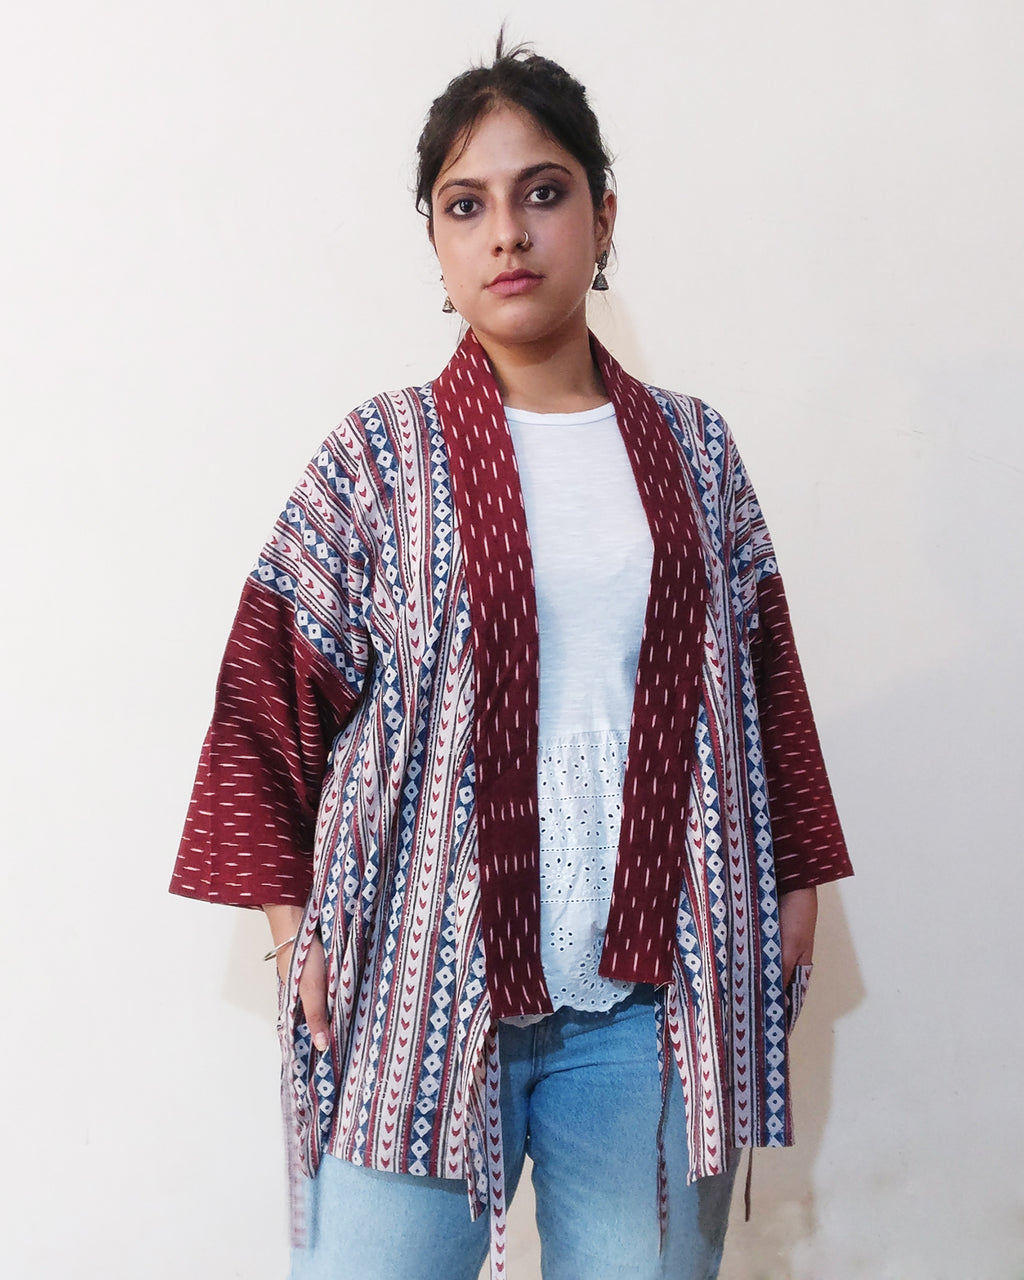 "Jinbei Jacket" is a comfortable adaptation of the casual Kimono, or "Jinbei," typically worn during humid summer in Japan. This Kimono Jacket is made from Indian geometric block print cotton and maroon cotton Ikat. Buy online!